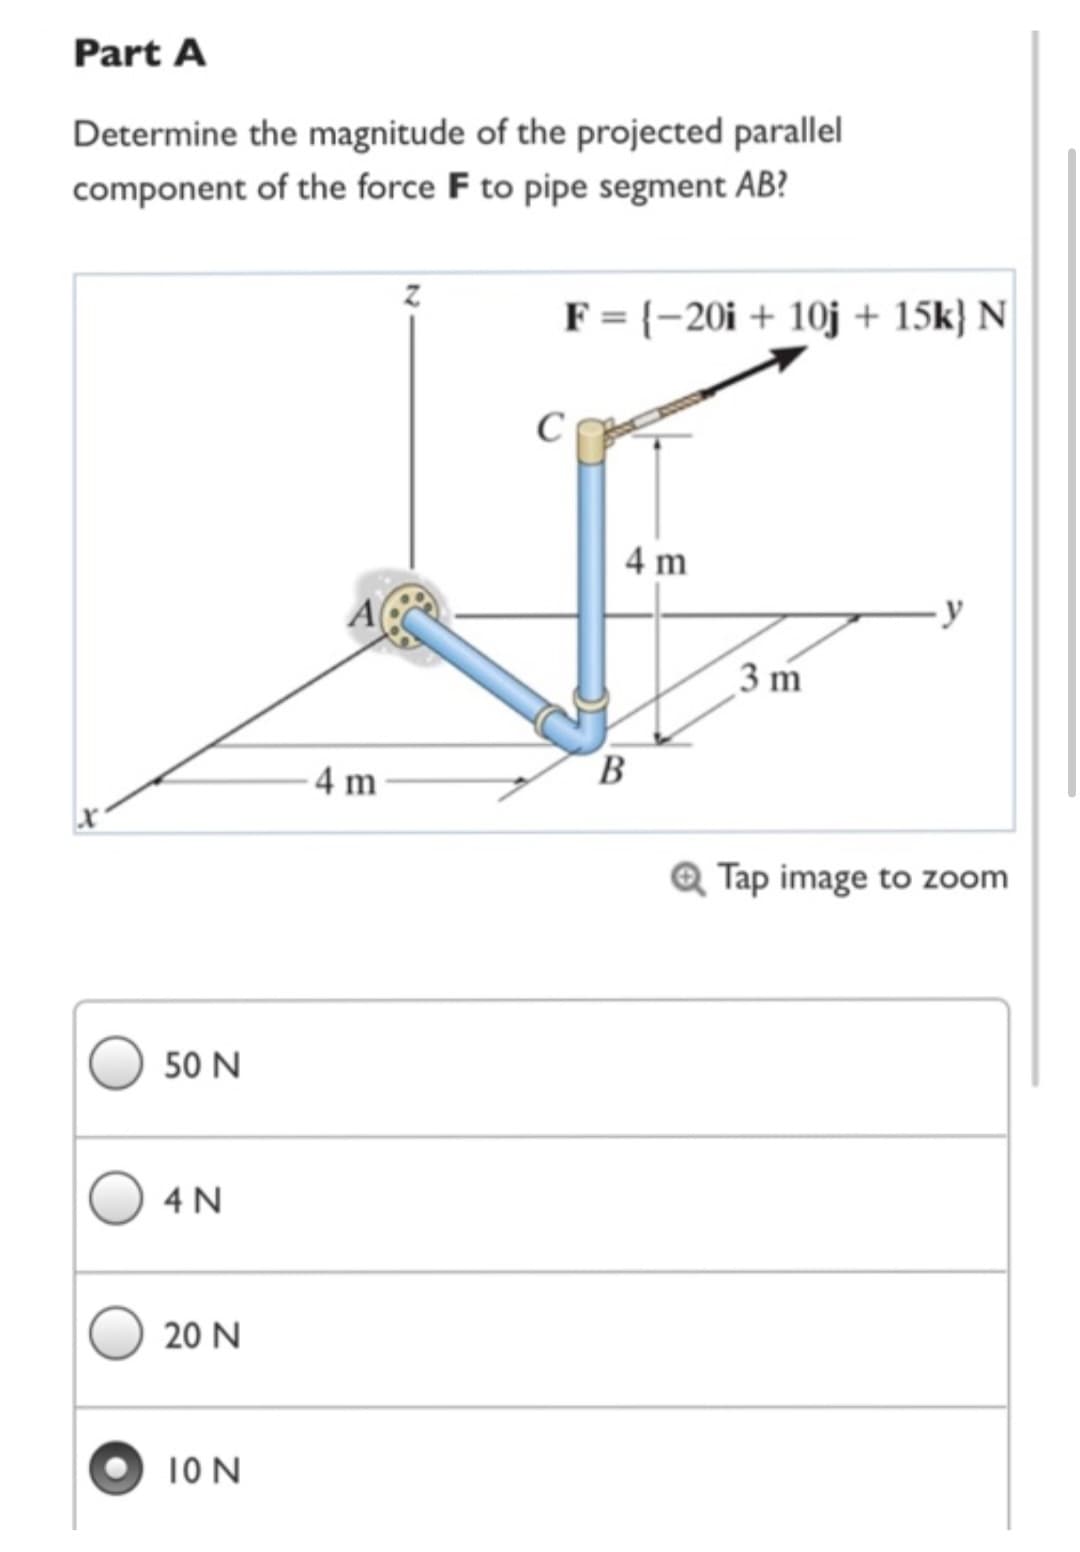 Part A
Determine the magnitude of the projected parallel
component of the force F to pipe segment AB?
50 N
4 N
20 N
ION
4 m
F = {-20i + 10j + 15k) N
C
4 m
B
3 m
-y
Q Tap image to zoom